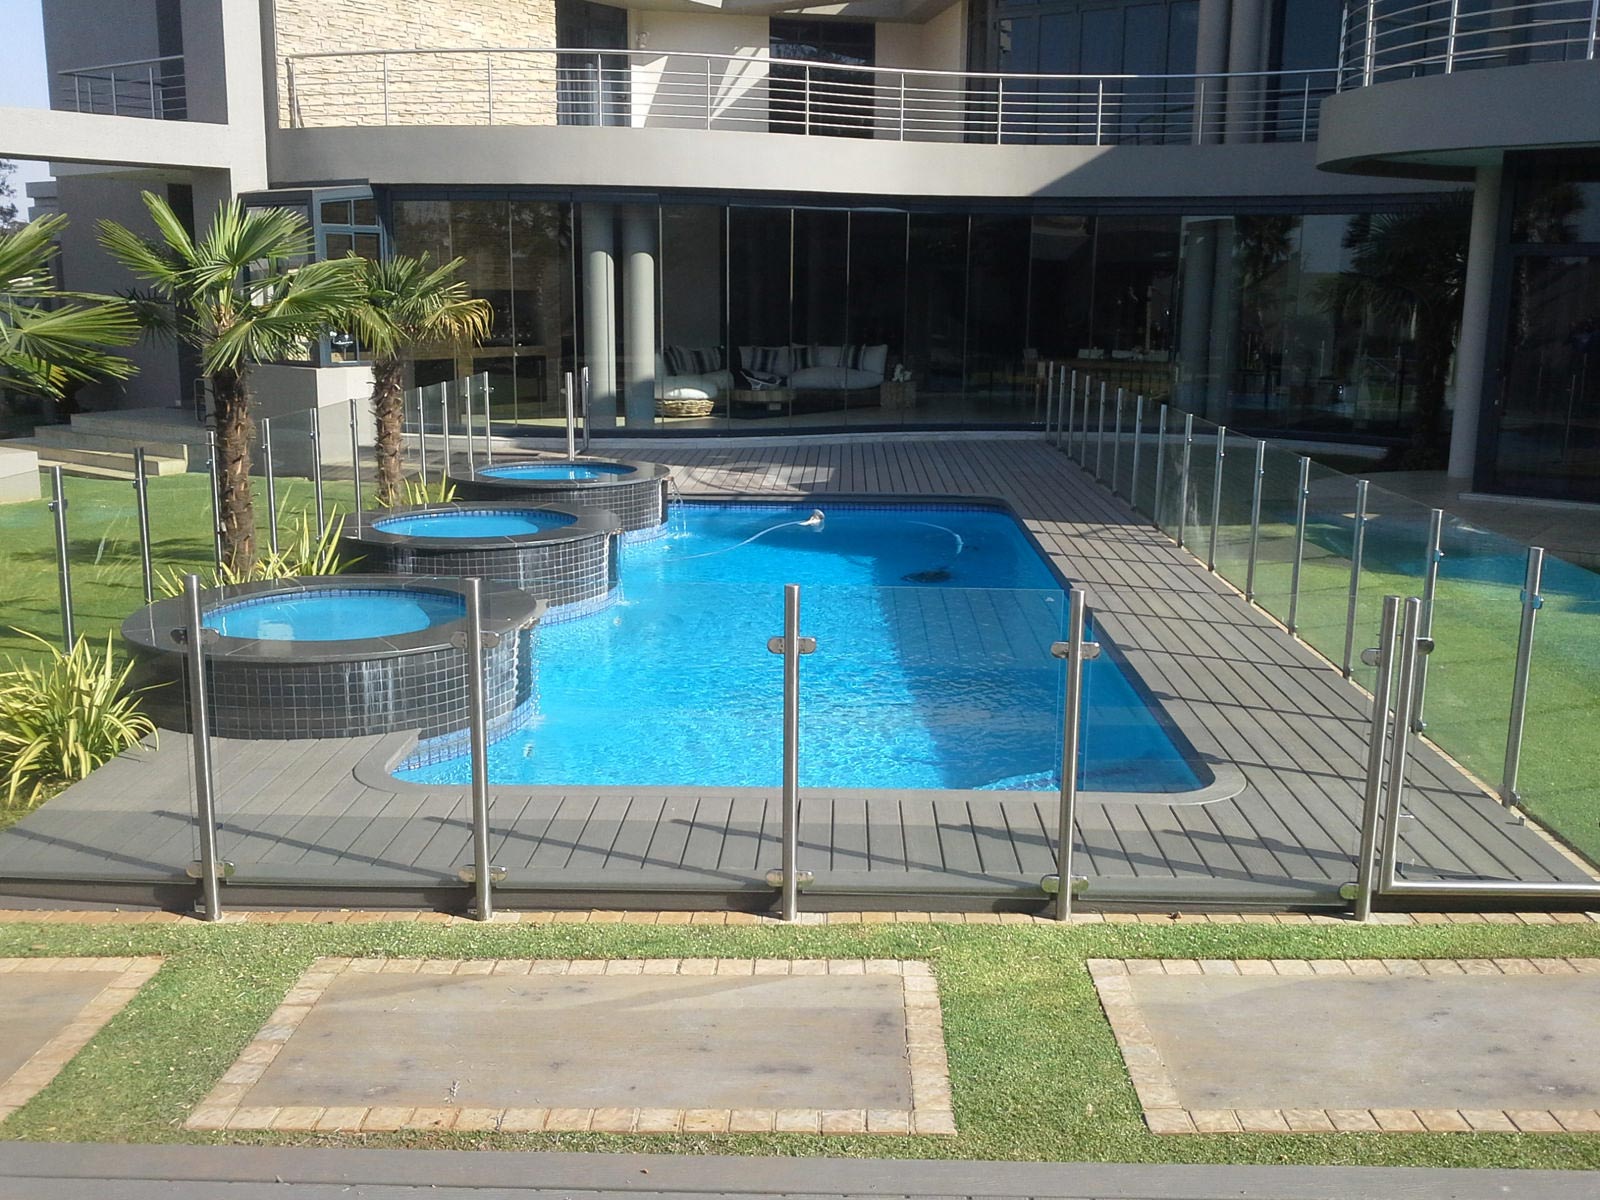 Pool with decking